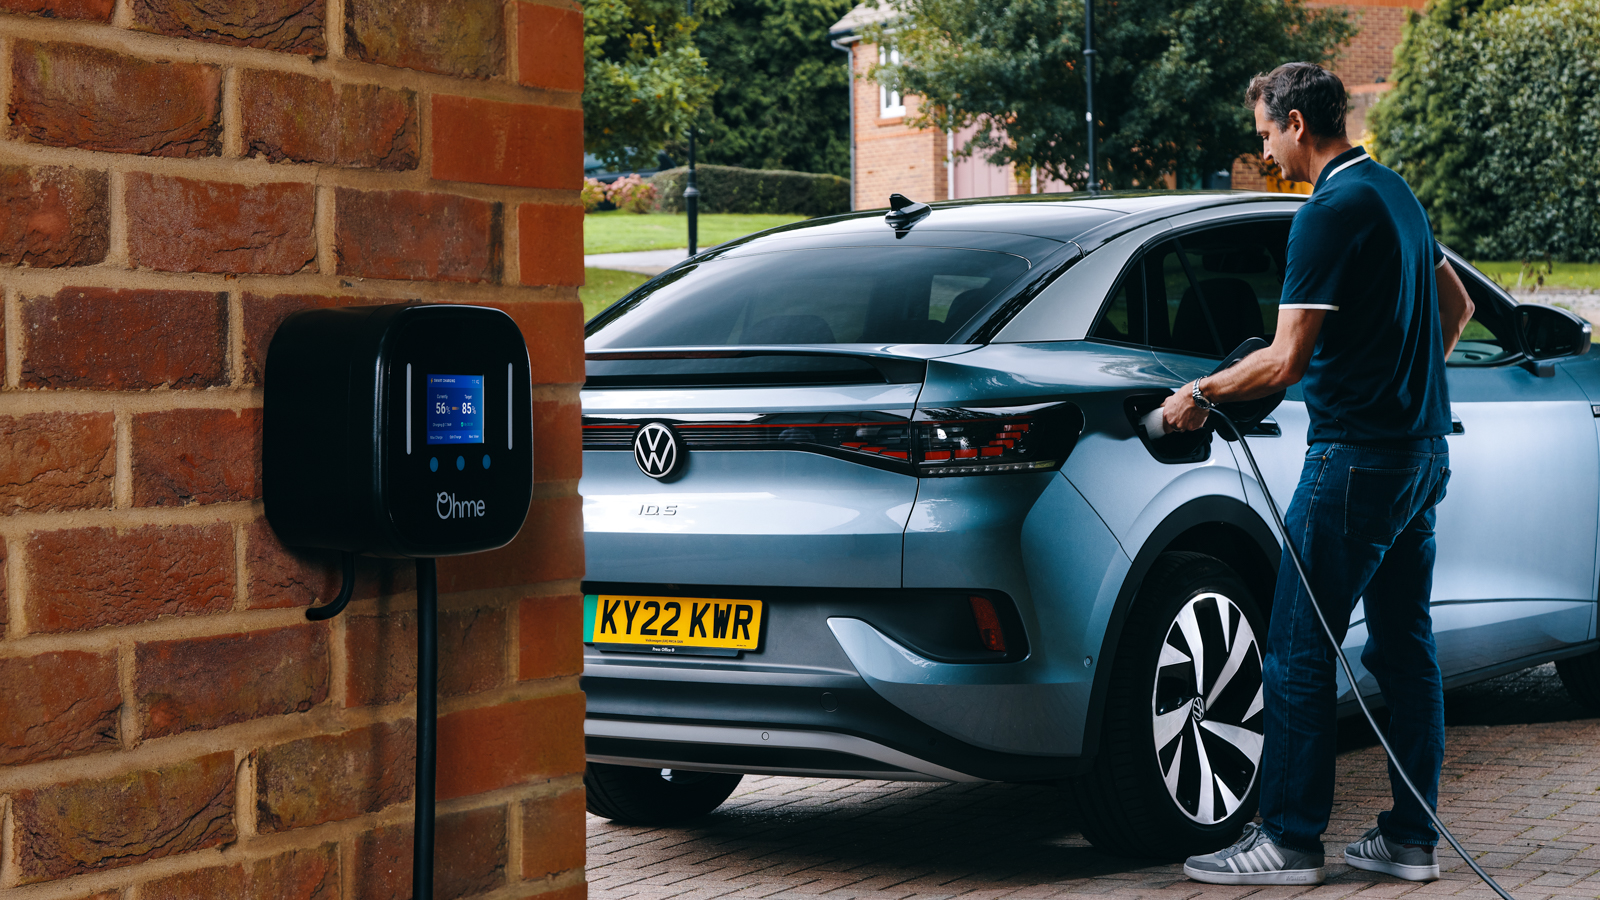 Silver Volkswagen ID5 being charged with Ohme Home Pro EV charger